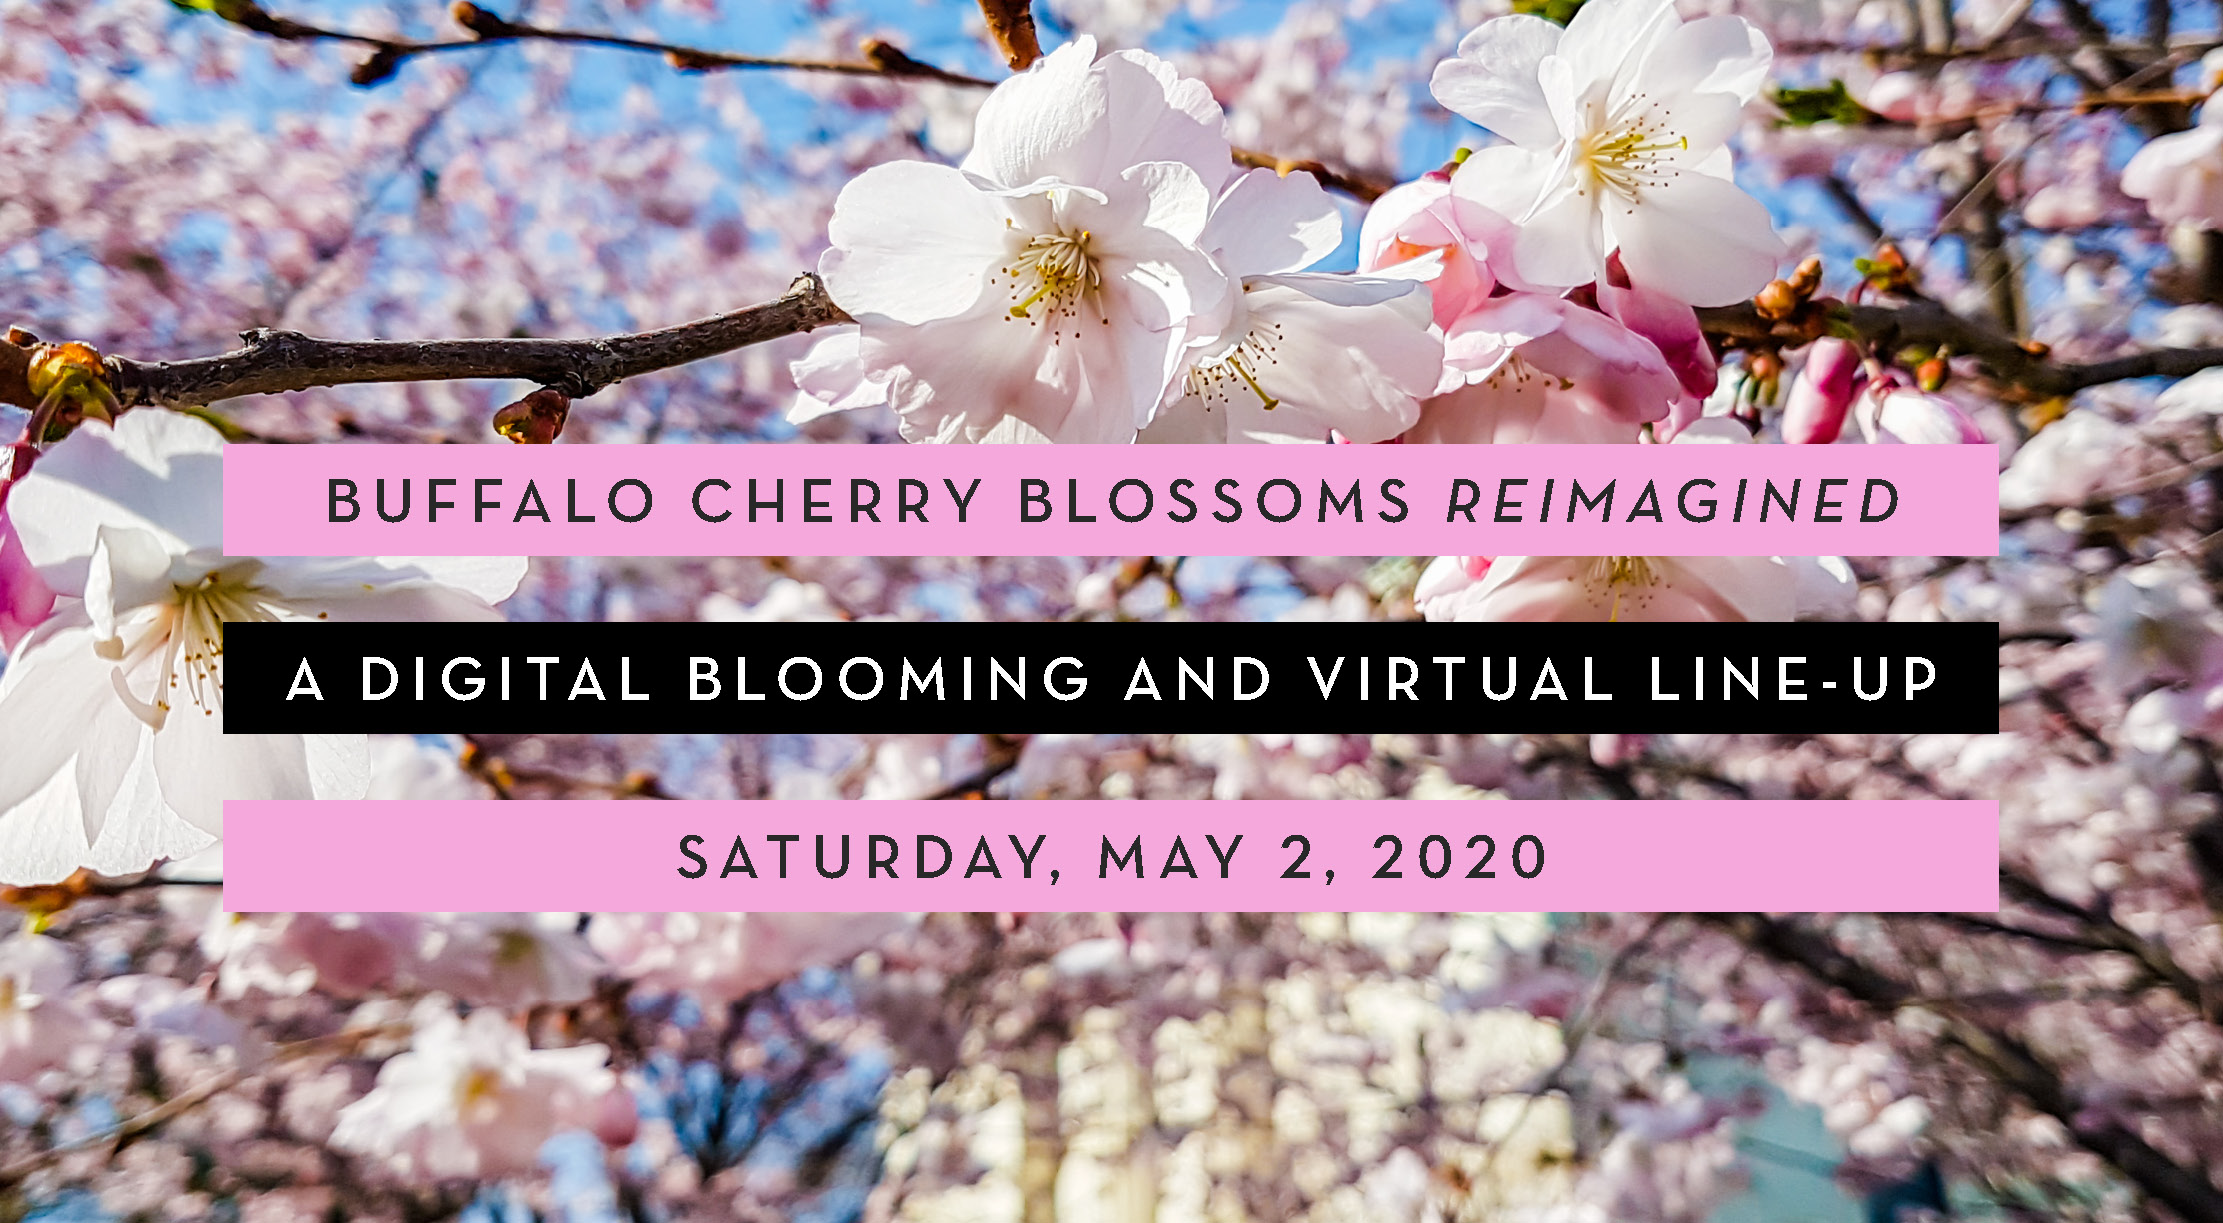 Buffalo Cherry Blossoms Reimagined May 2, 2020